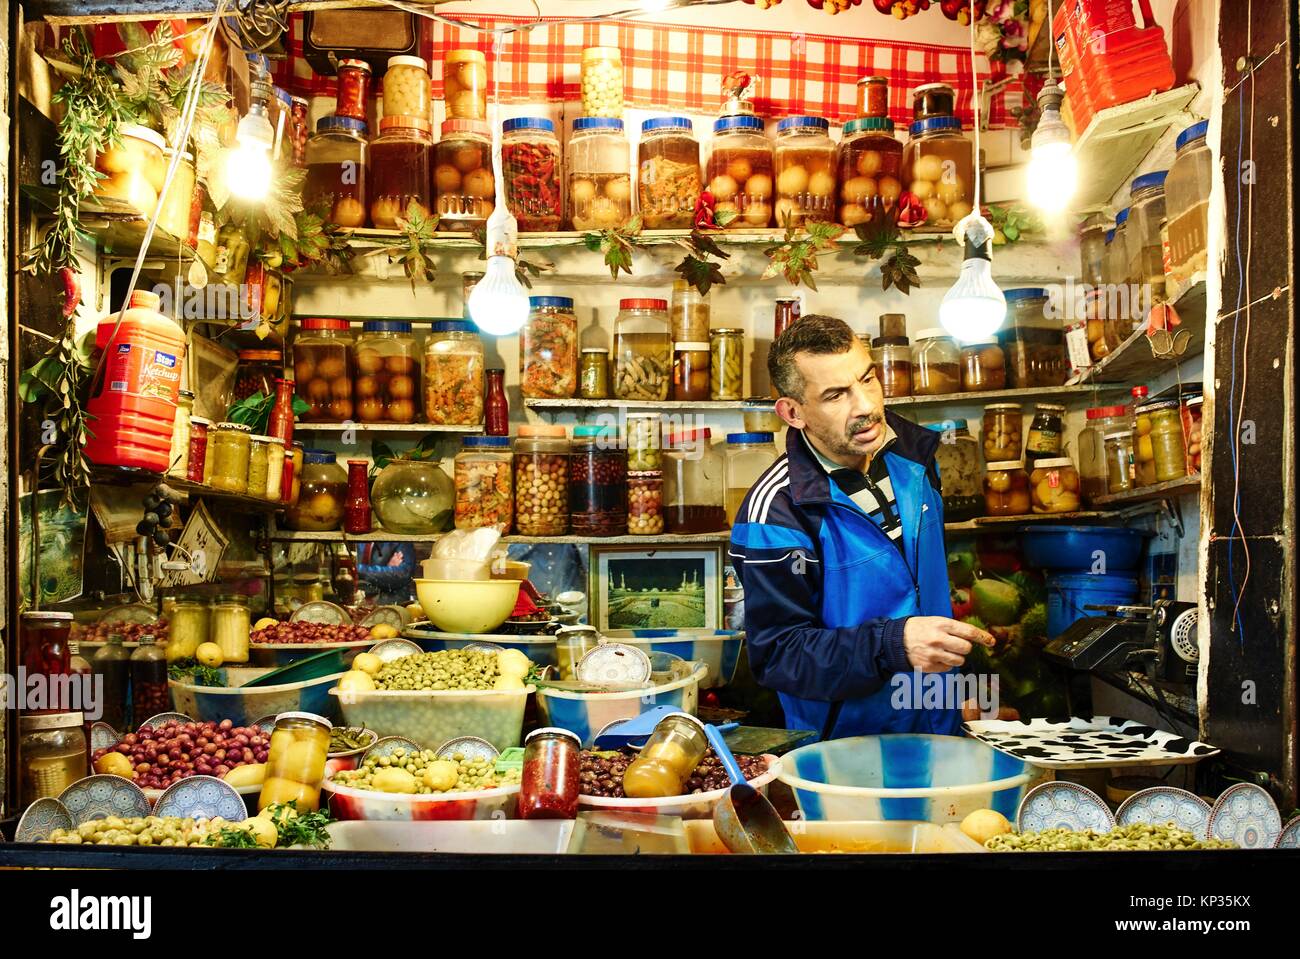 Selling olives in brine in a shop in the souk of Fez, Morocco Stock Photo